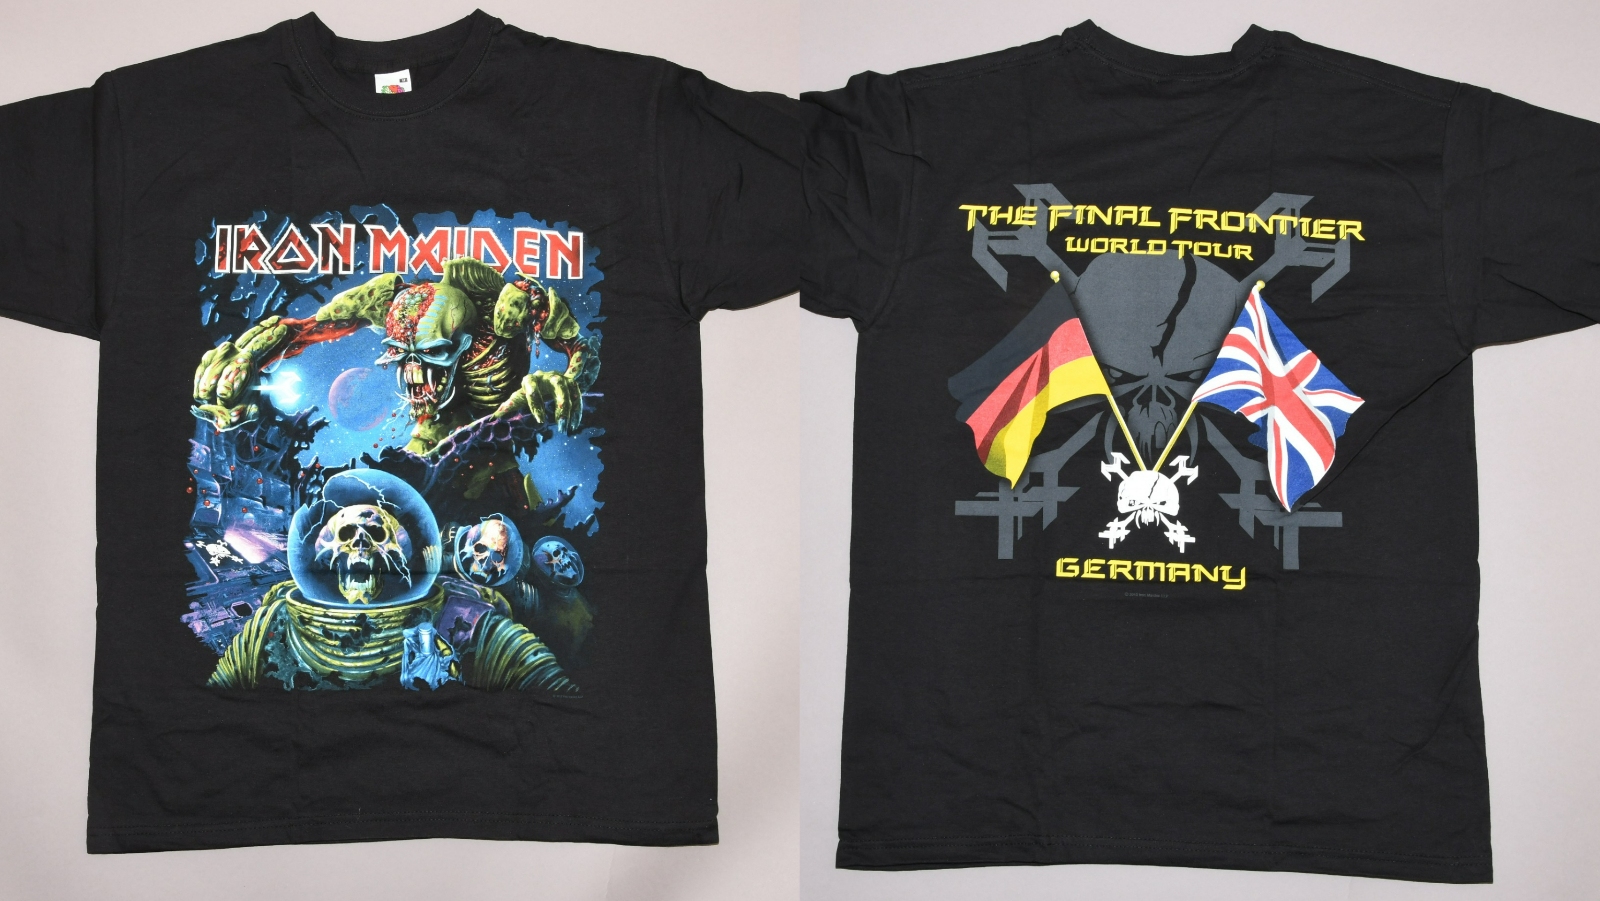  Police released images of the Iron Maiden t-shirt worn by the man they are appealing for.